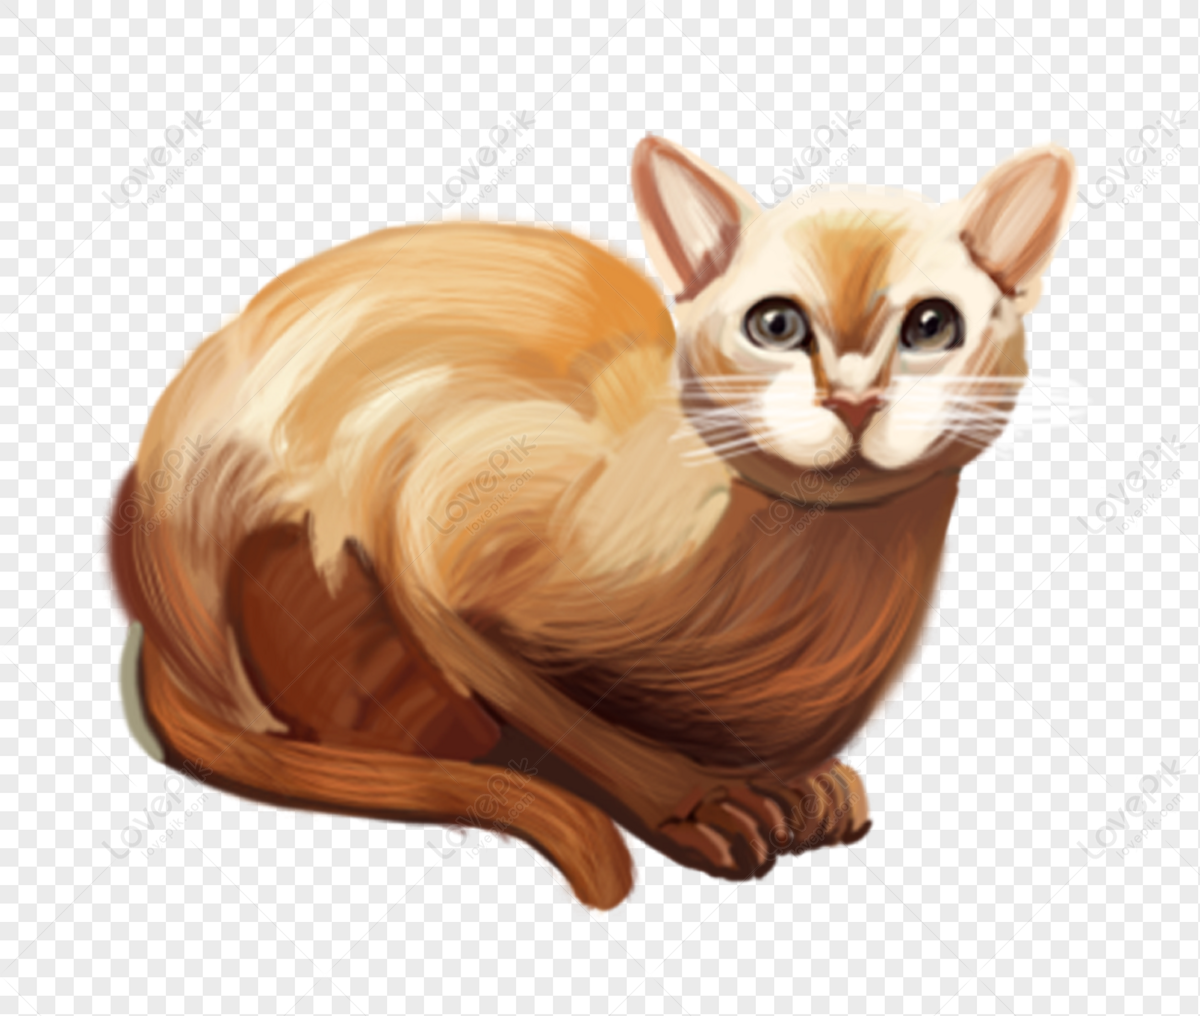 Cat PNG White Transparent And Clipart Image For Free Download - Lovepik ...